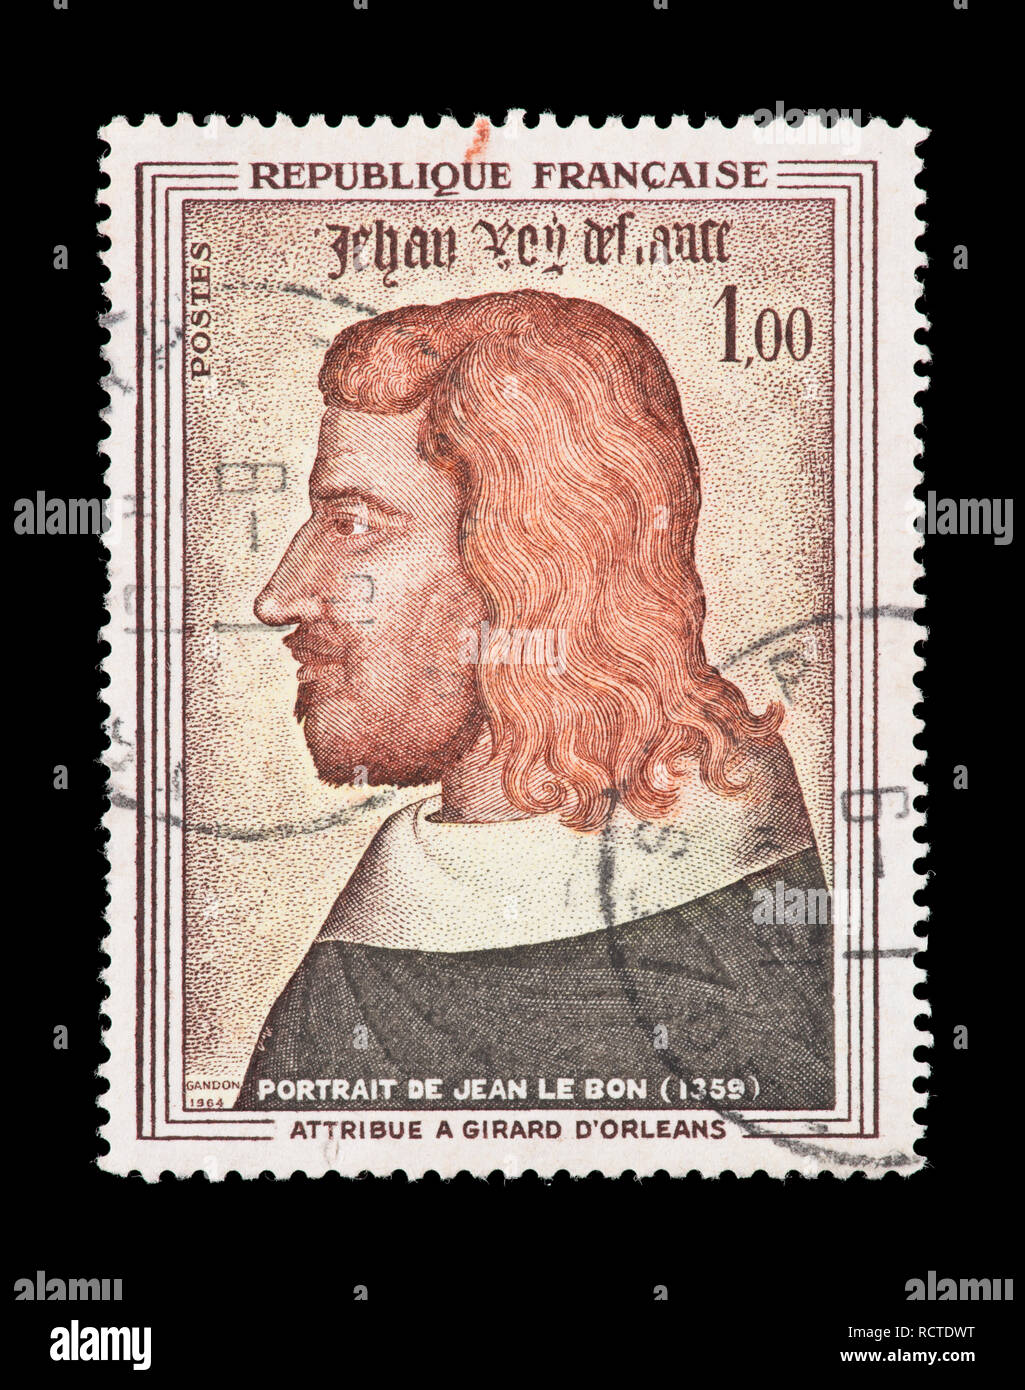 Postage stamp from France depicting a Girard d'Orleans painting of John II the Good Stock Photo